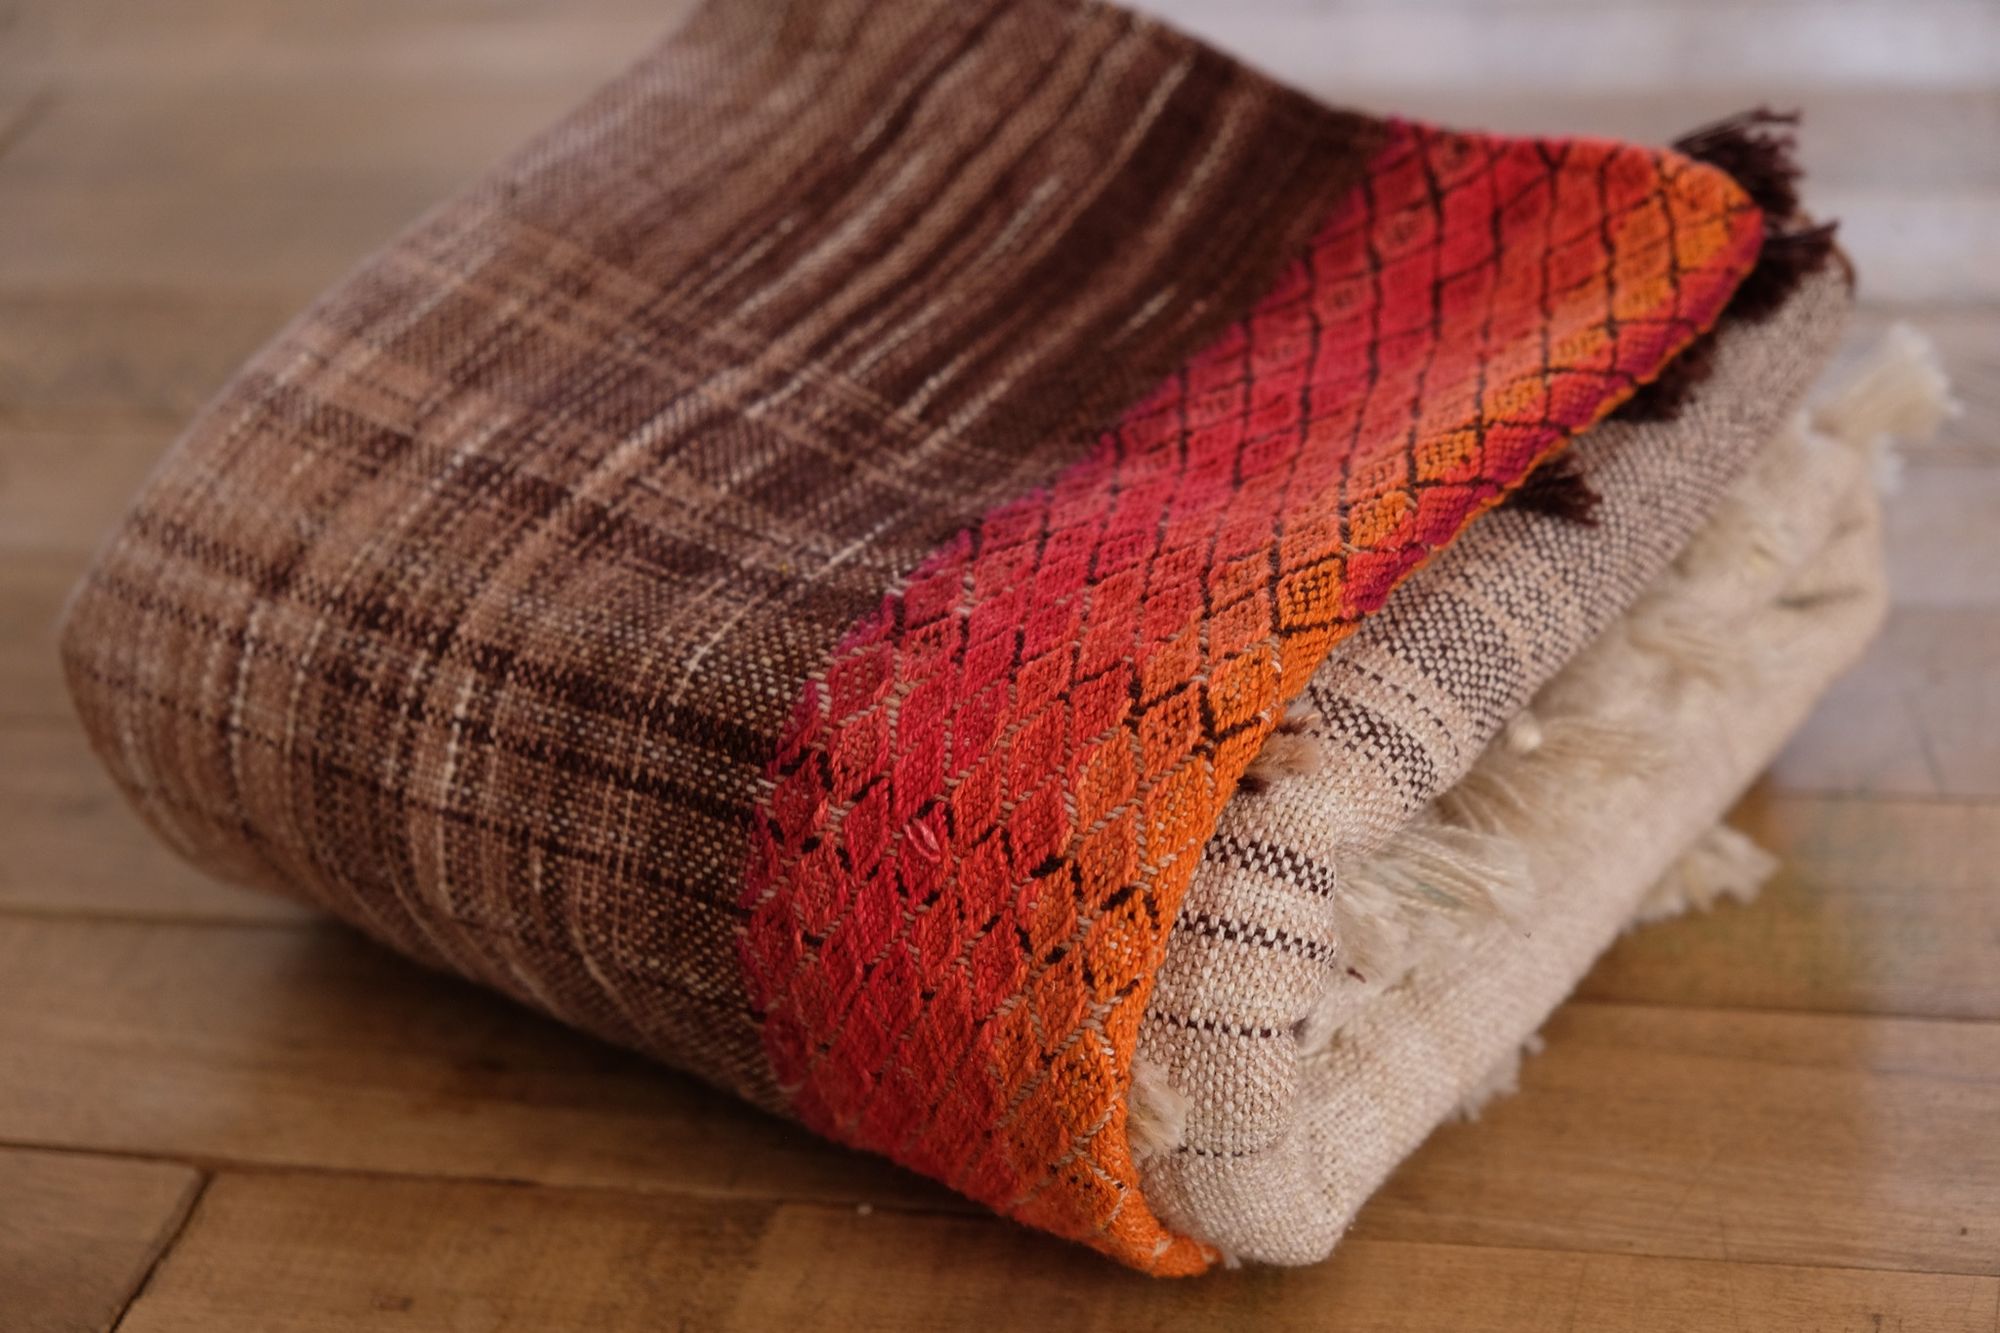 detail of handwoven fabric with textured diamond weave in rainbow colors with browns and tans folded on a wooden floor